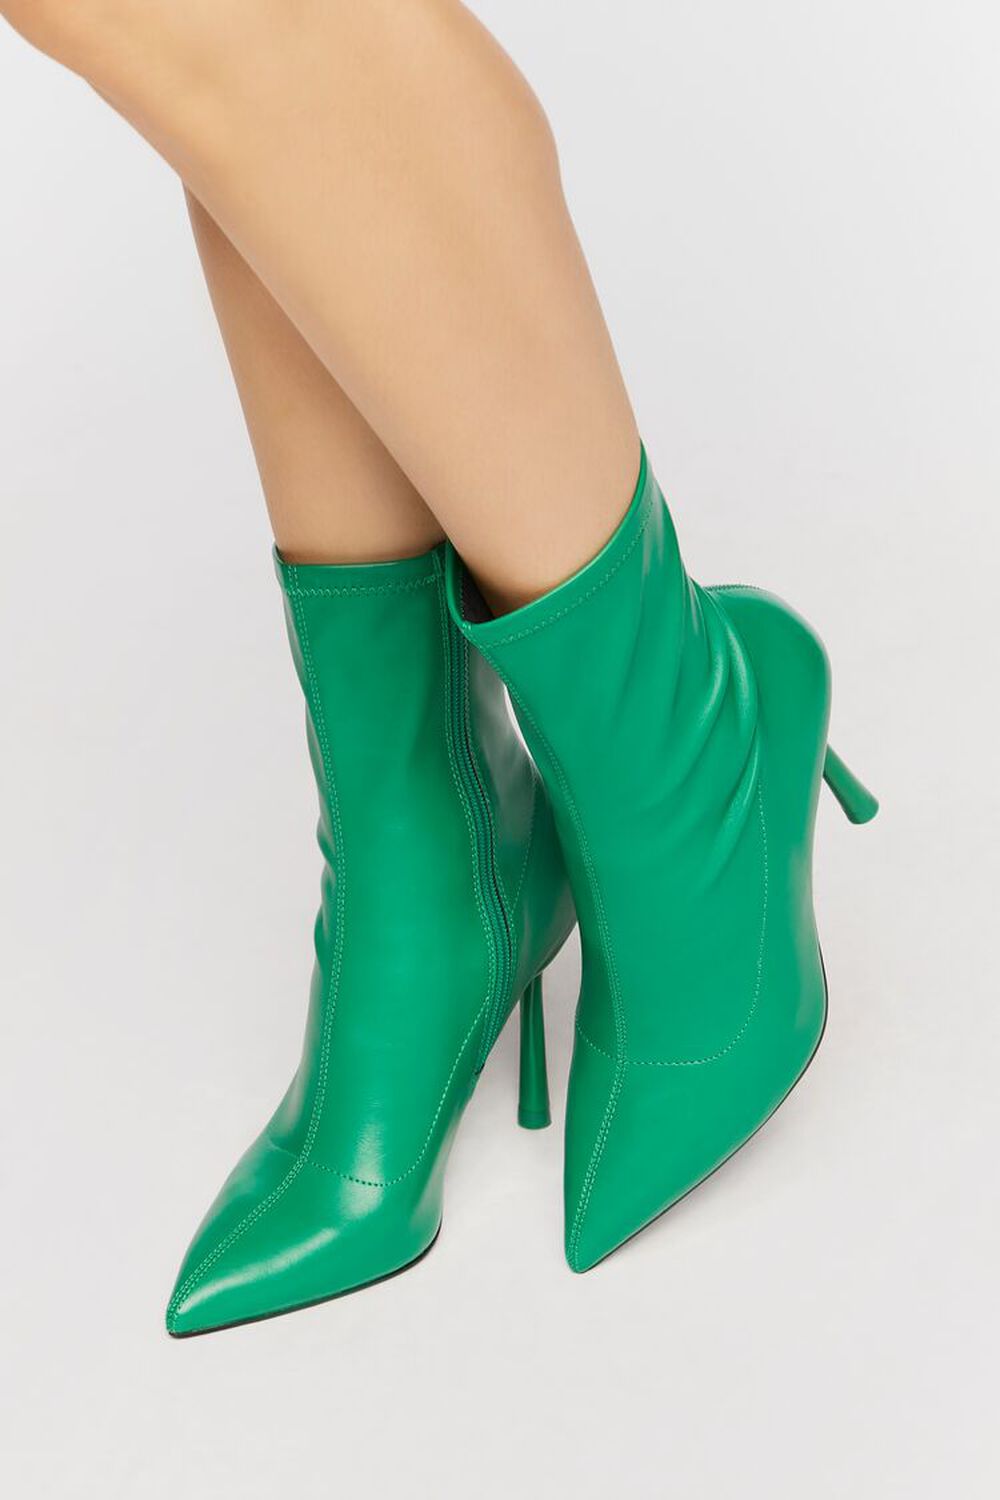 GREEN Faux Leather Stiletto Booties, image 1